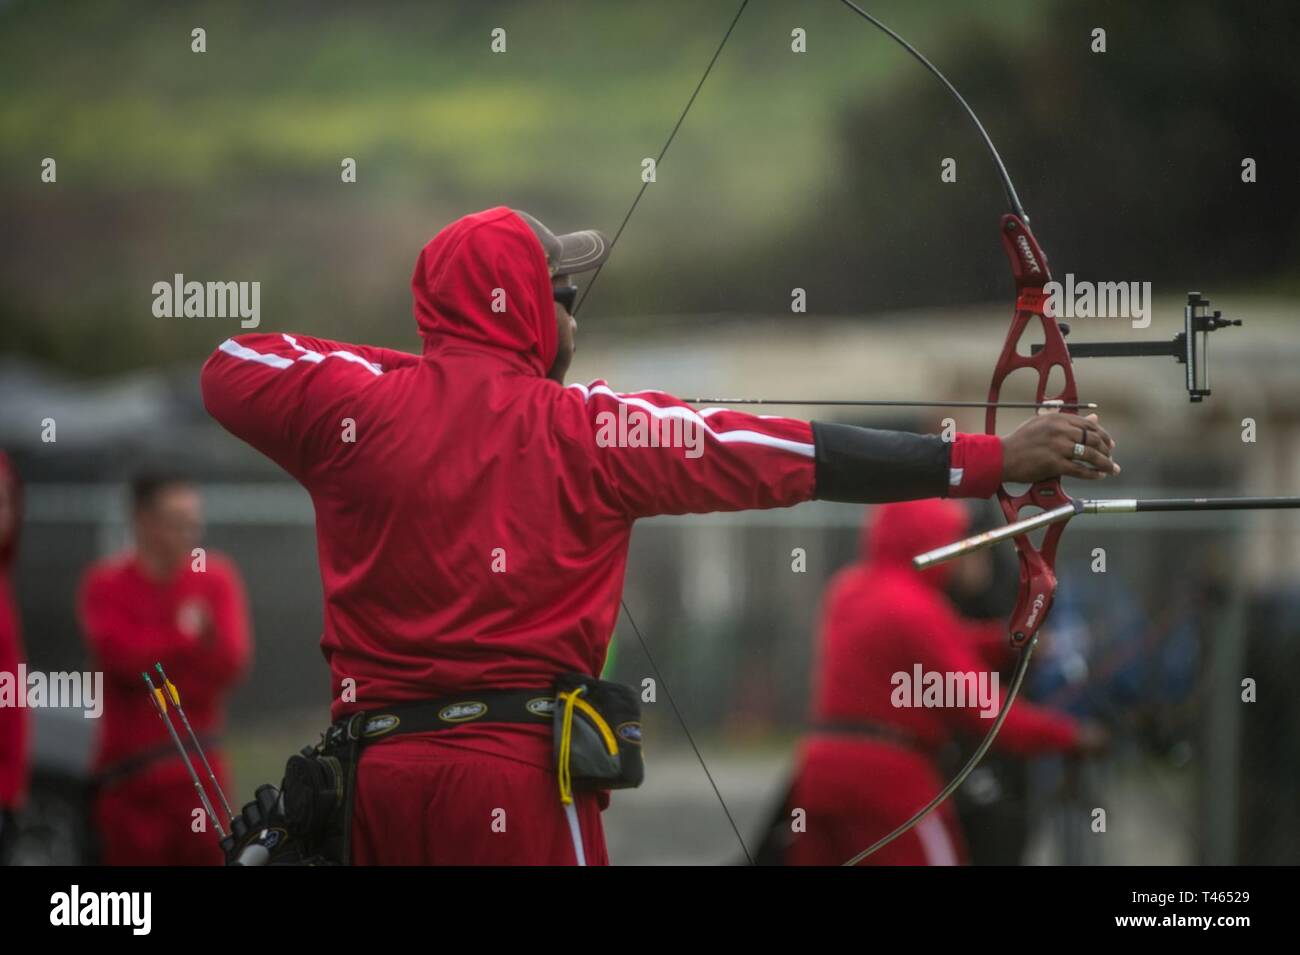 A U.S. Marine Corps athlete participates in the 2019 Marine Corps Trials archery competition at Marine Corps Base Camp Pendleton, California, March 2. The Marine Corps Trials promotes recovery and rehabilitation through adaptive sports participation and develops camaraderie among recovering service members and veterans. Additionally, the competition is an opportunity for participants to demonstrate physical and mental achievements and serves as the primary venue to select Marine Corps participants for the DoD Warrior Games. Stock Photo